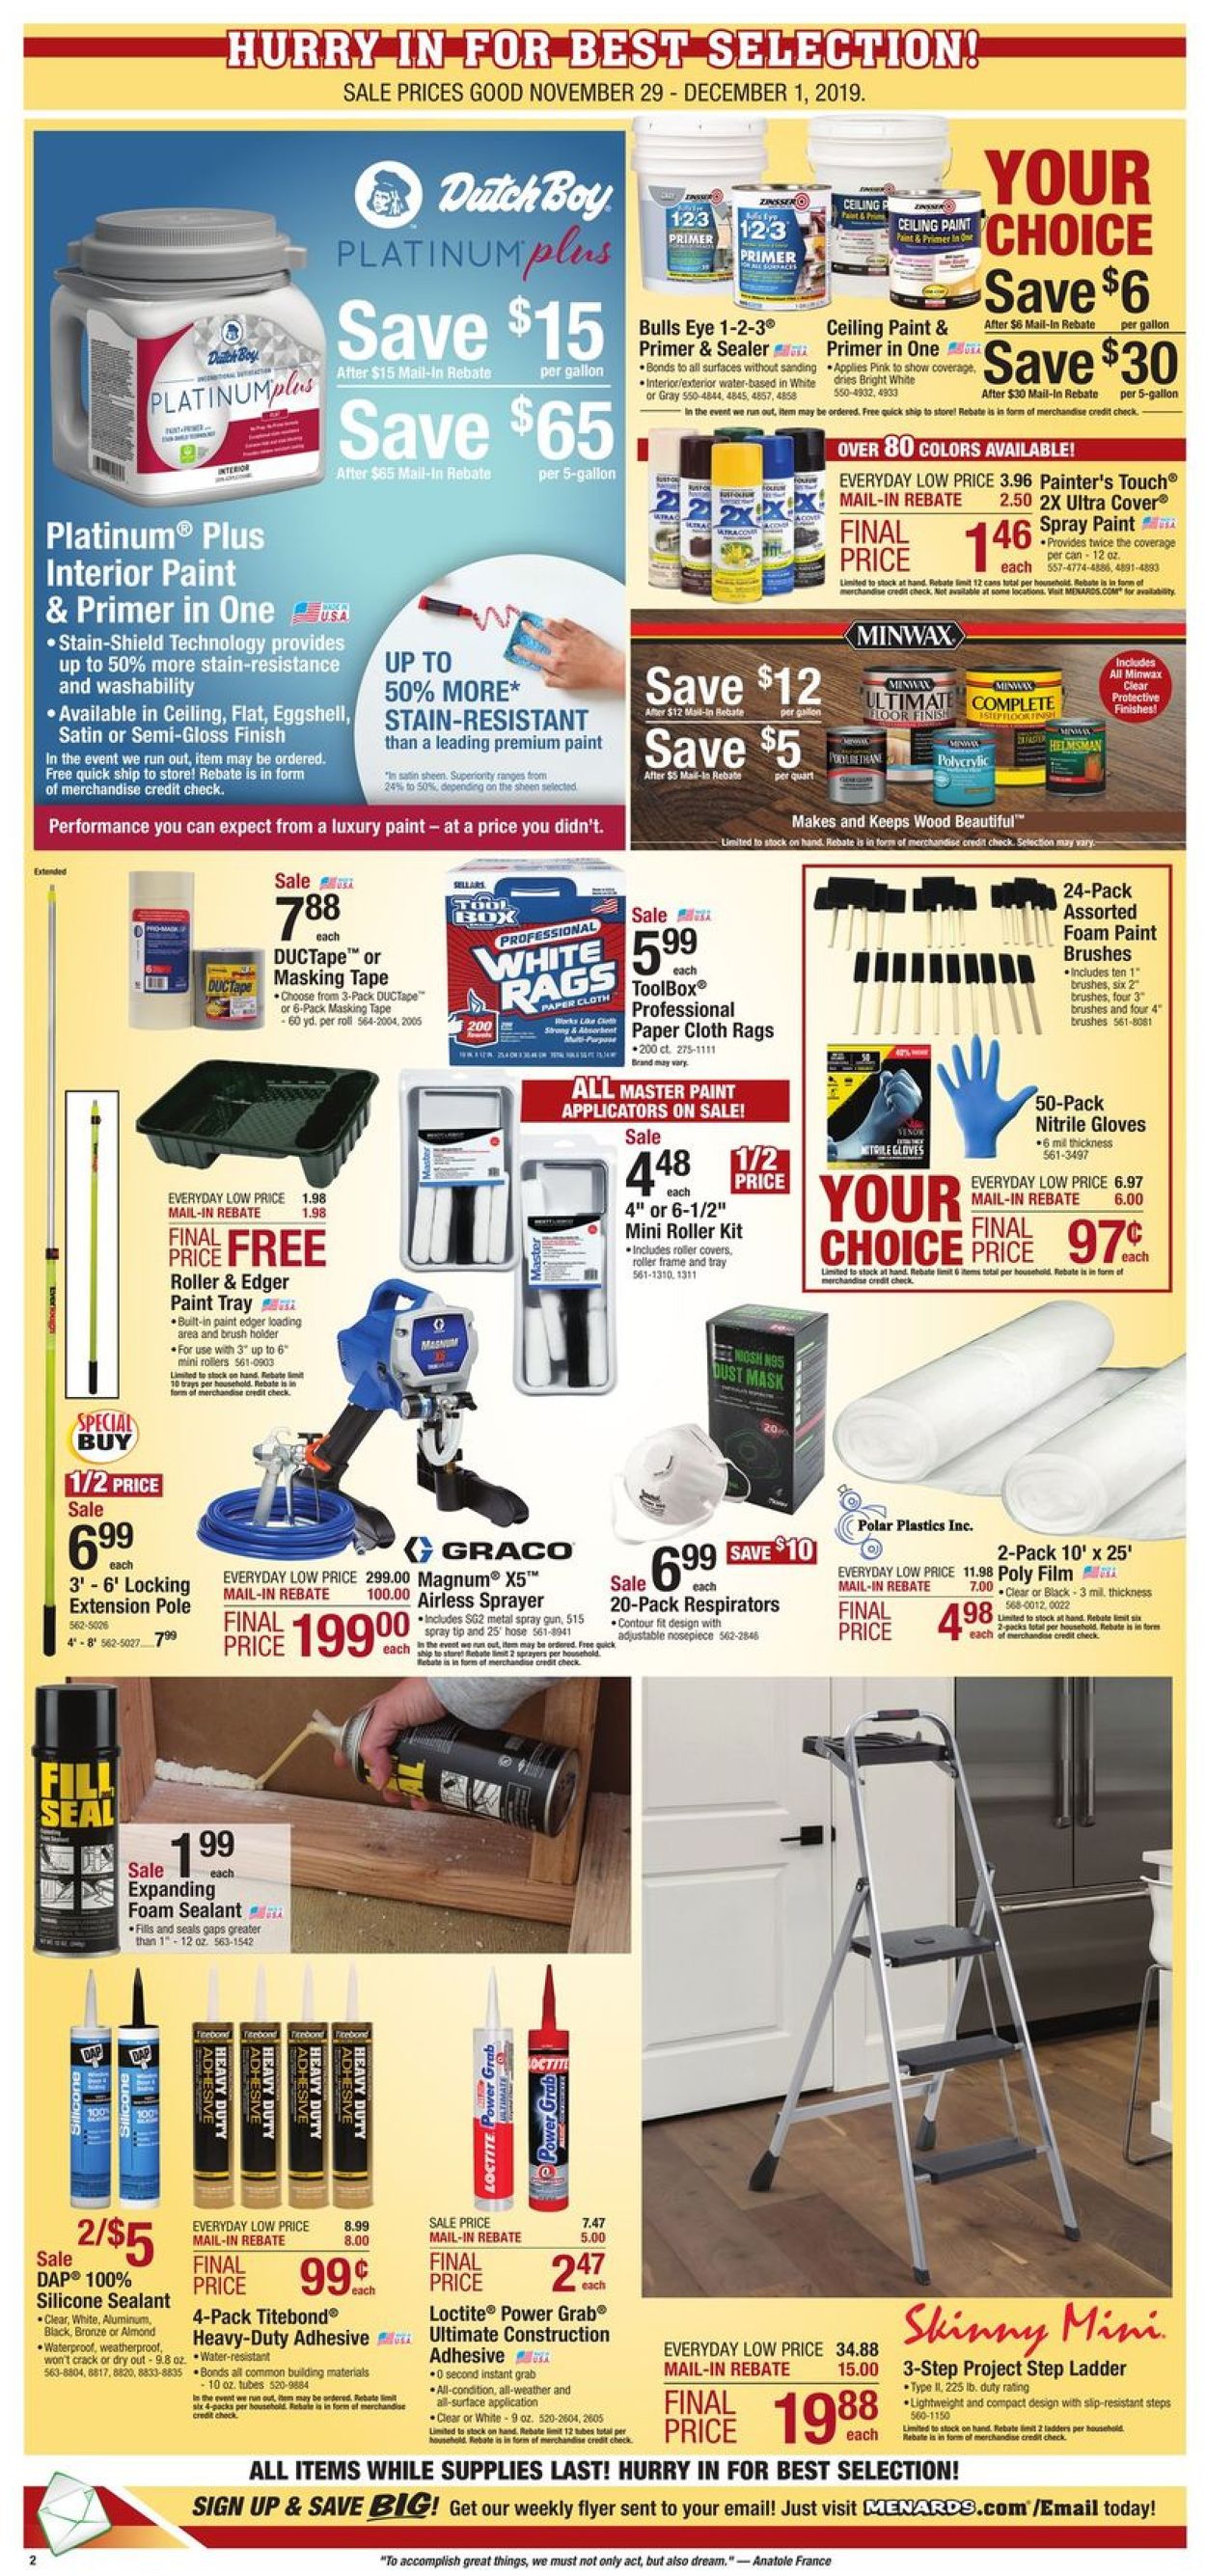 Menards - Black Friday Sale 2019 Current weekly ad 11/29 - 12/01/2019 [2] - 0